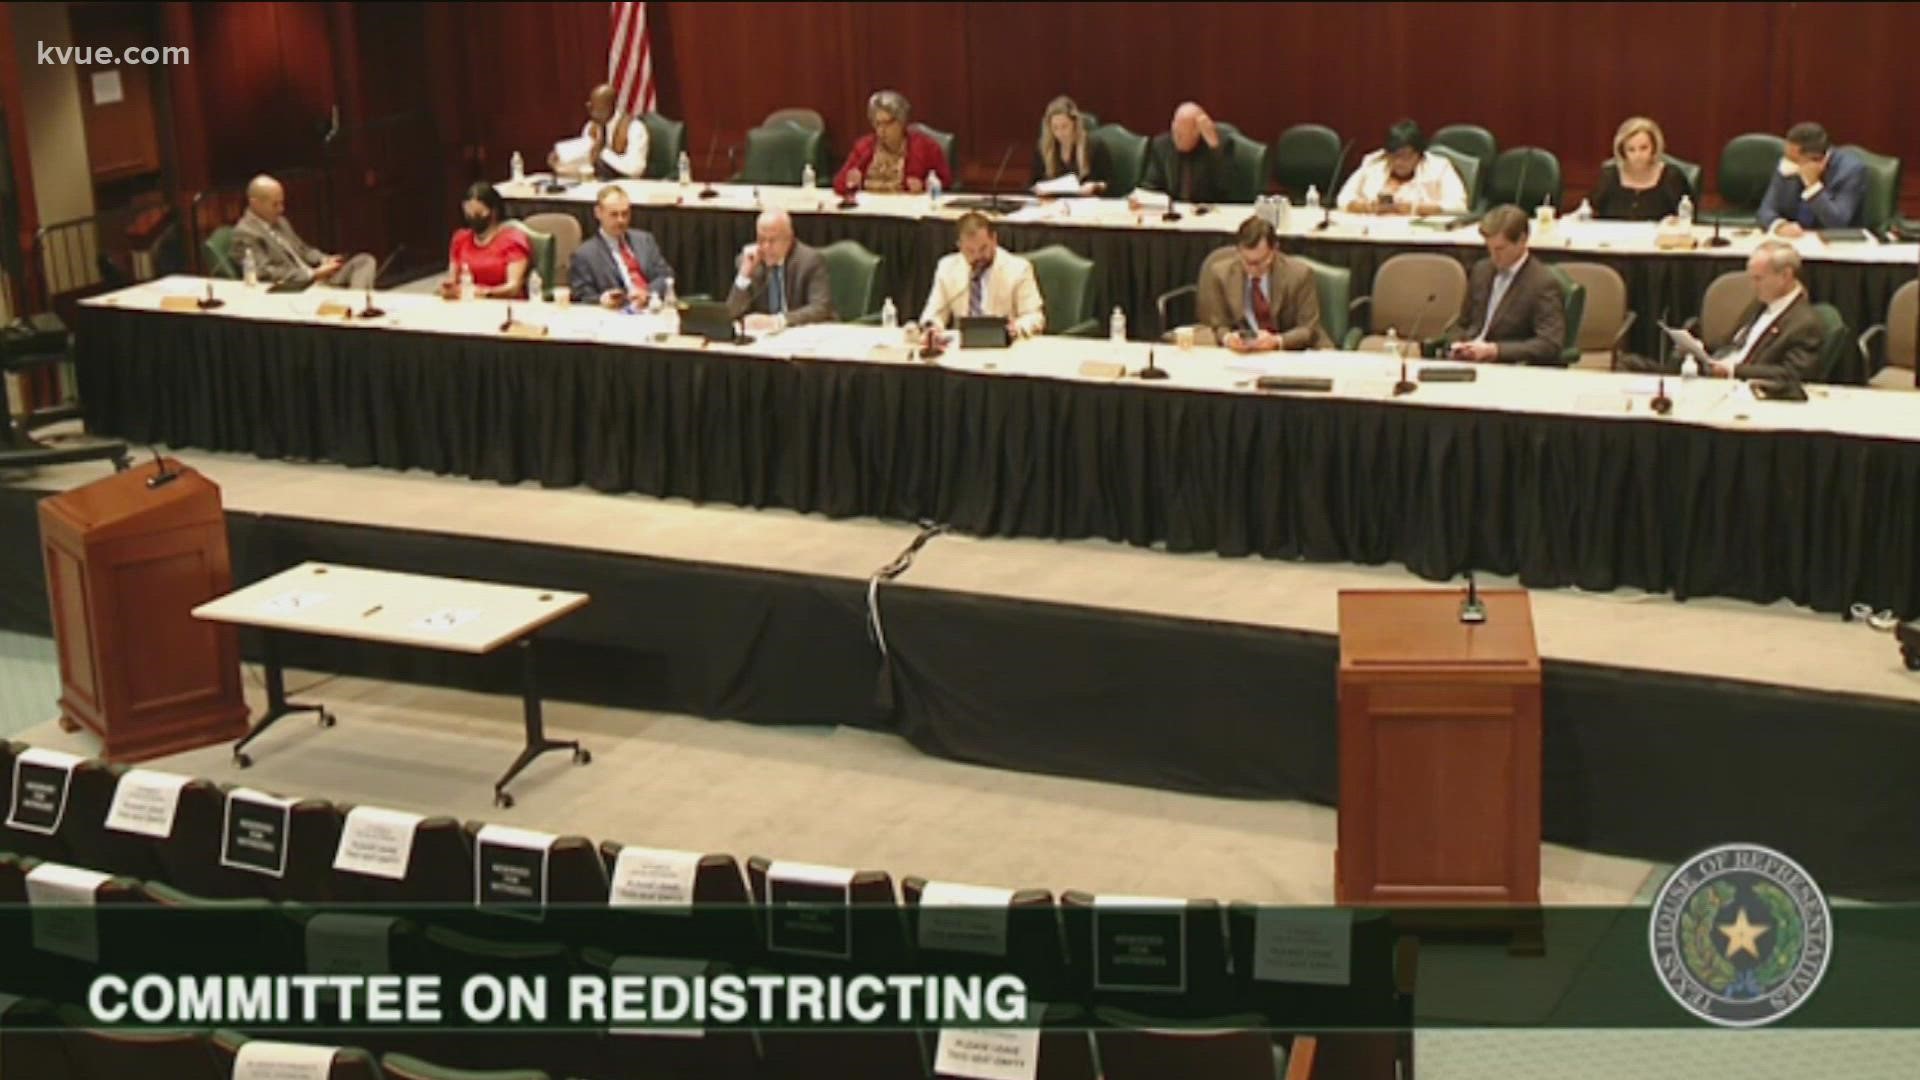 The House Committee on Redistricting voted along party lines to send HB 1 to the full House.